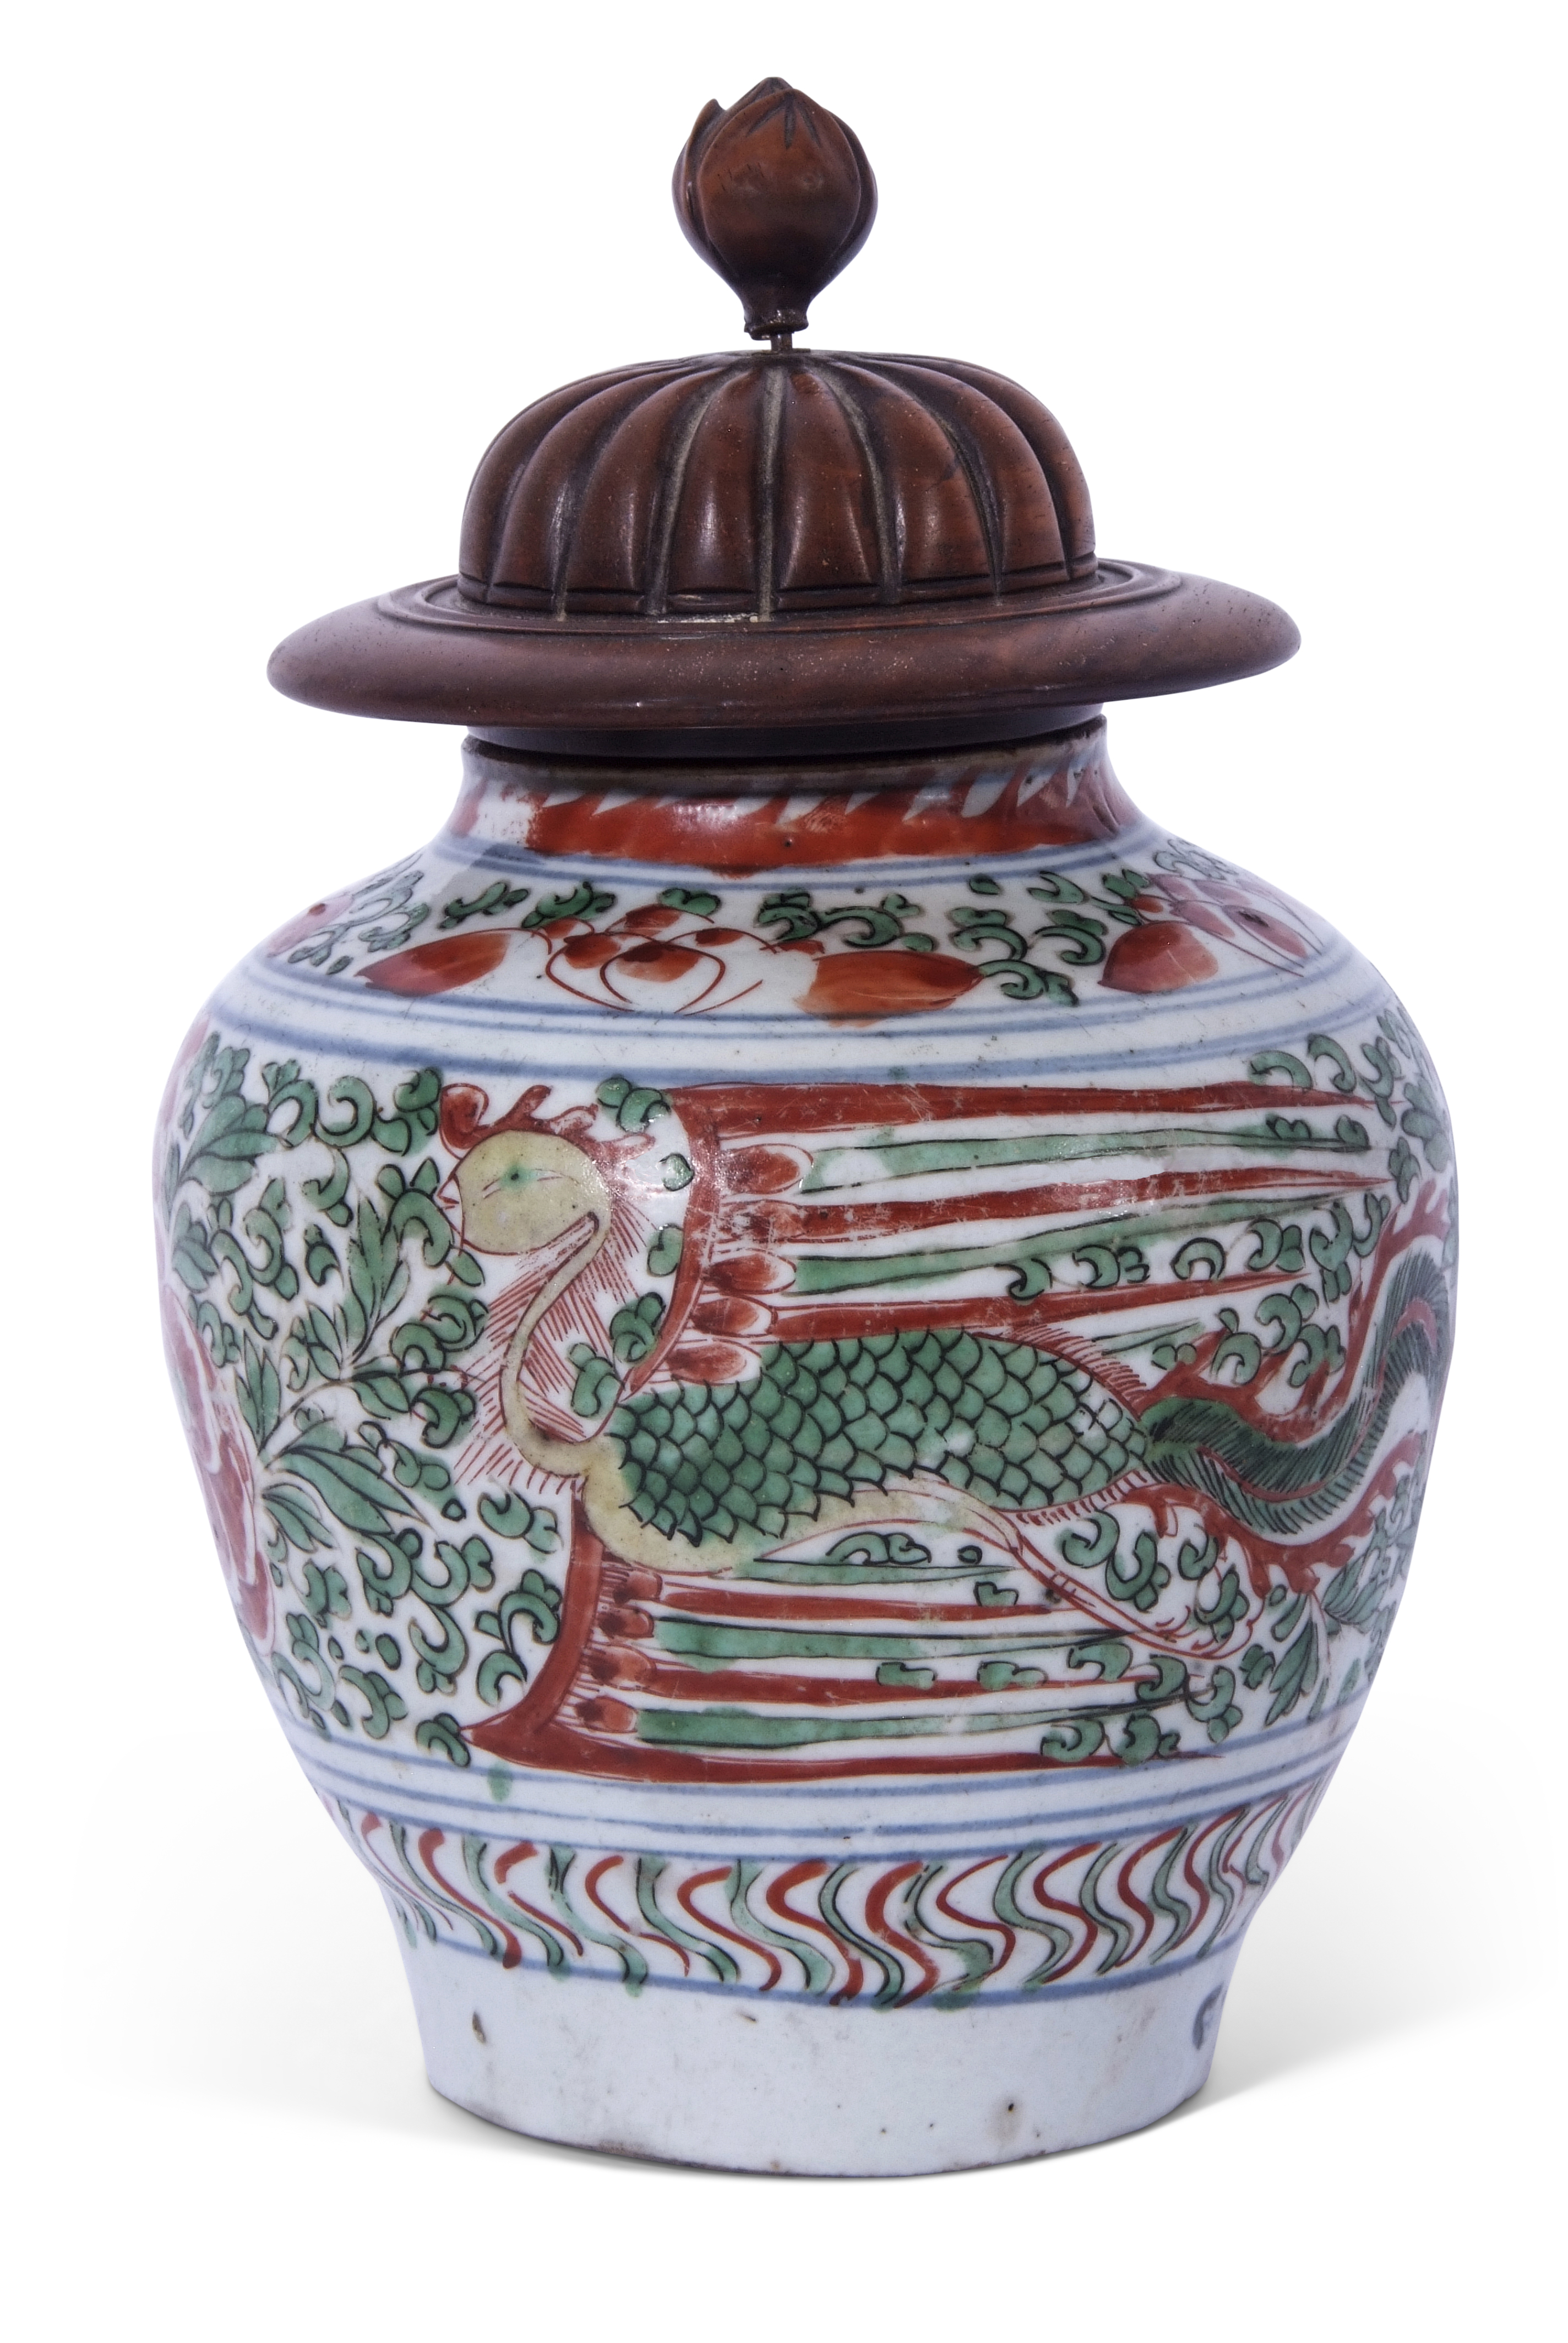 Ceramic jar, possibly Middle Eastern, decorated in iron red and green enamels with a Ming type